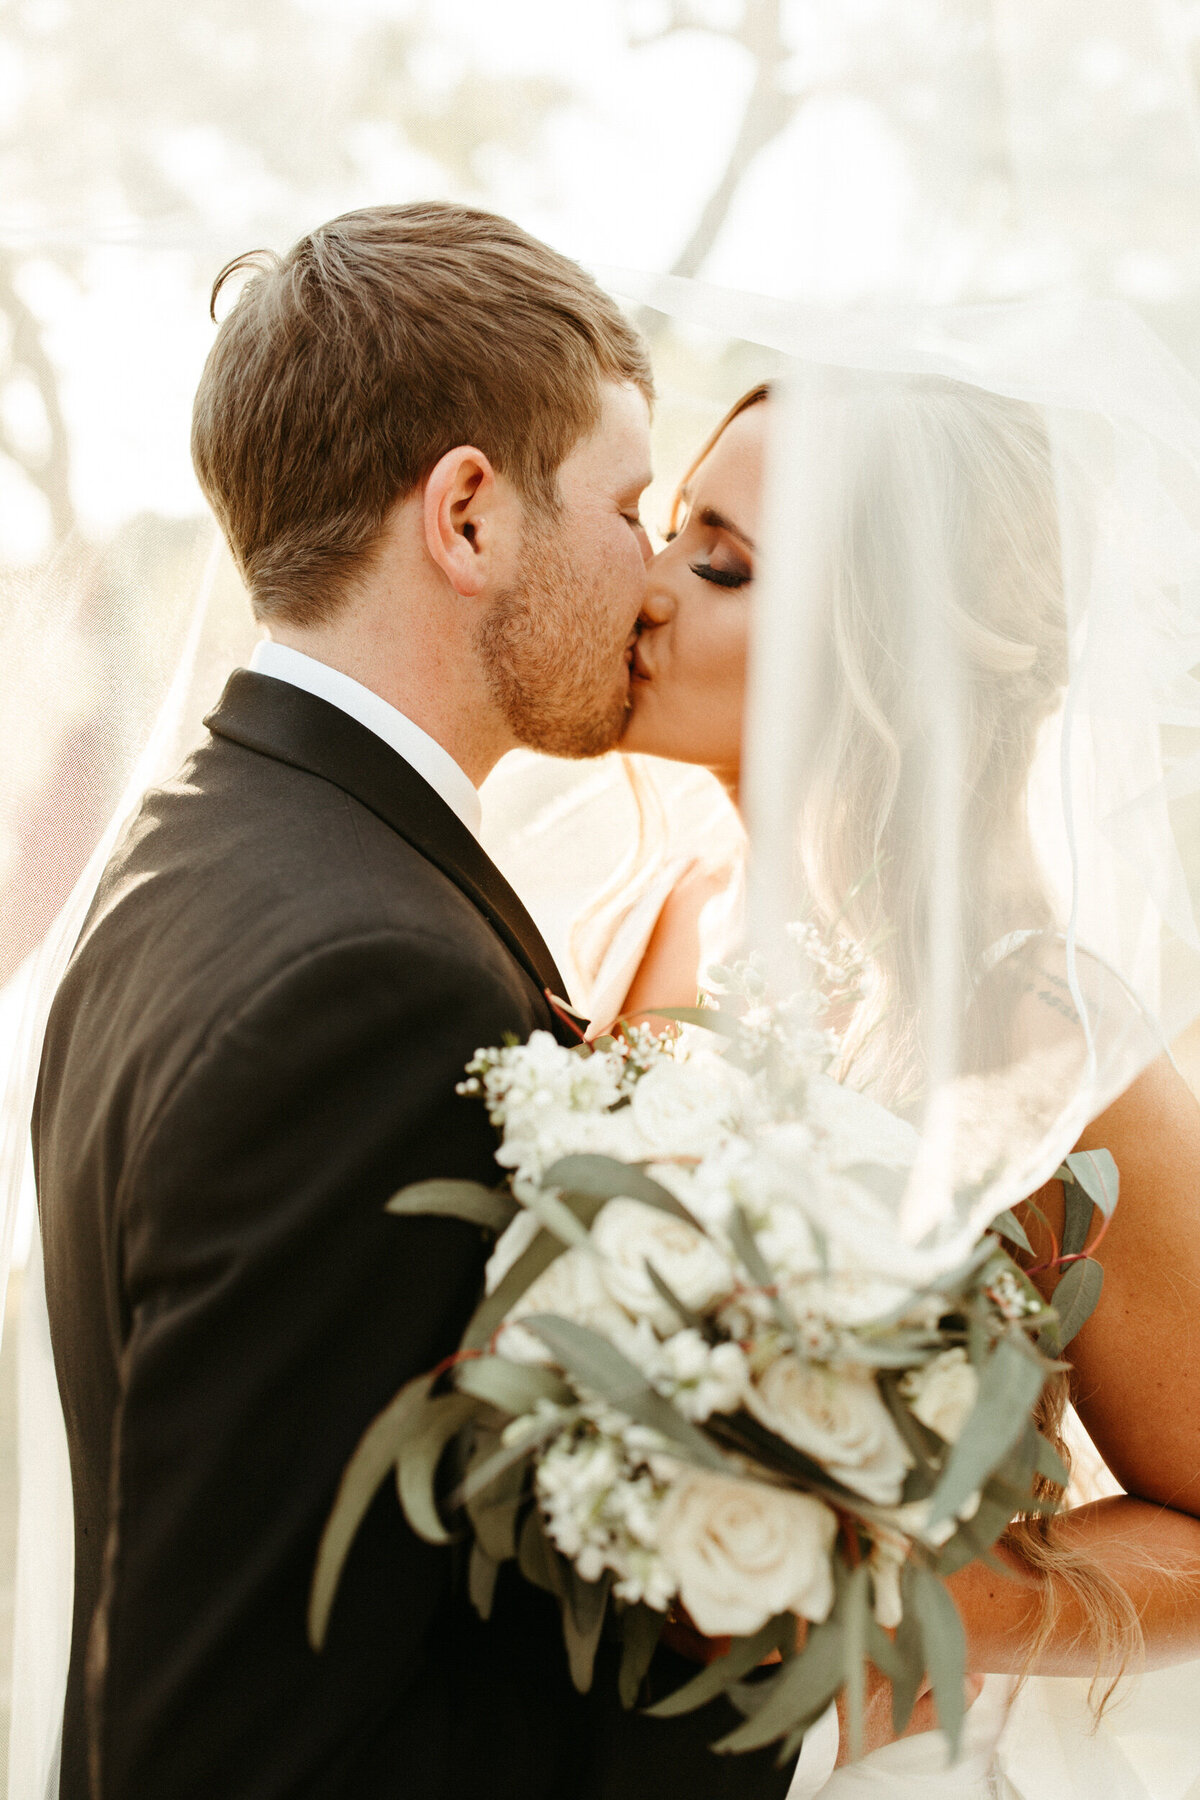 Classic bride and groom kissing underneath her veil as she holds her neutral white bouquet with greenery